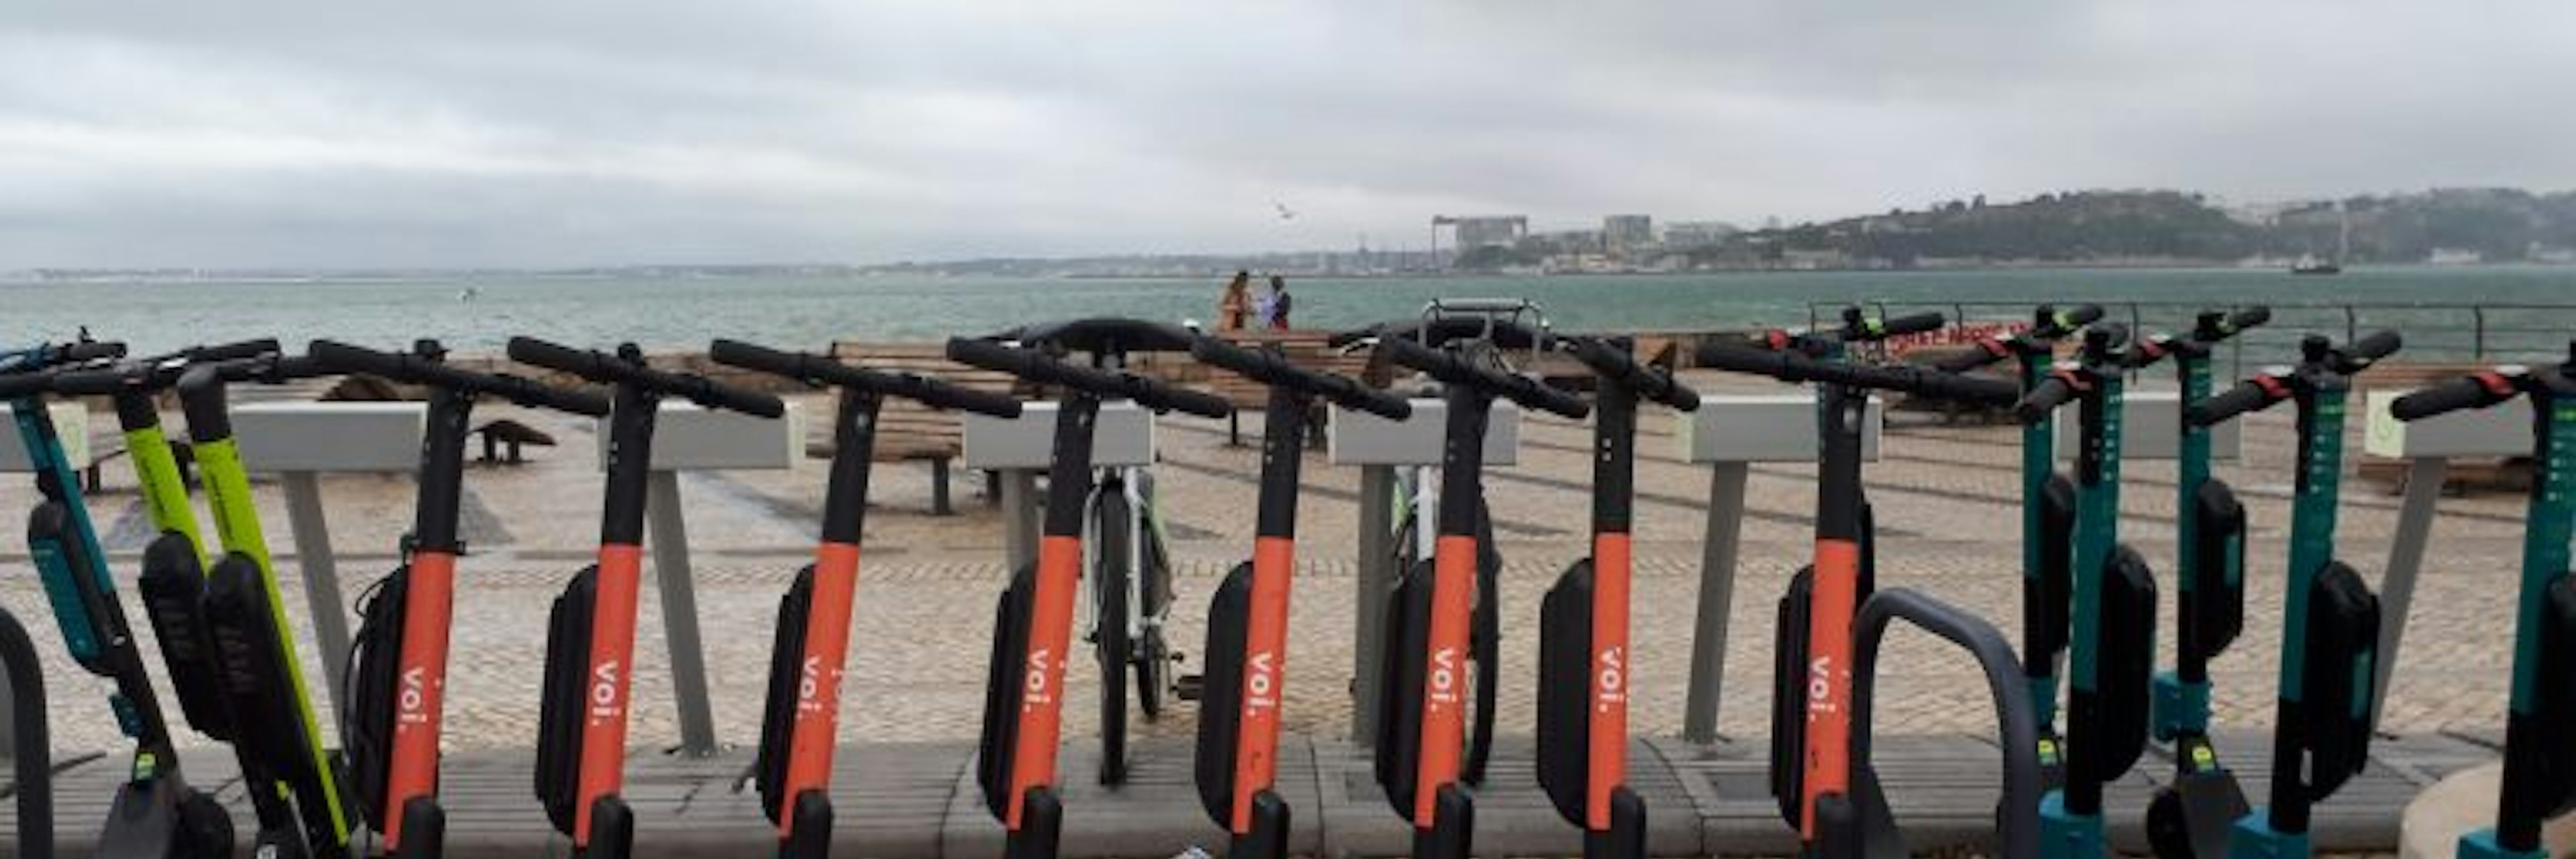 Line of Voi scooters in Barcelona